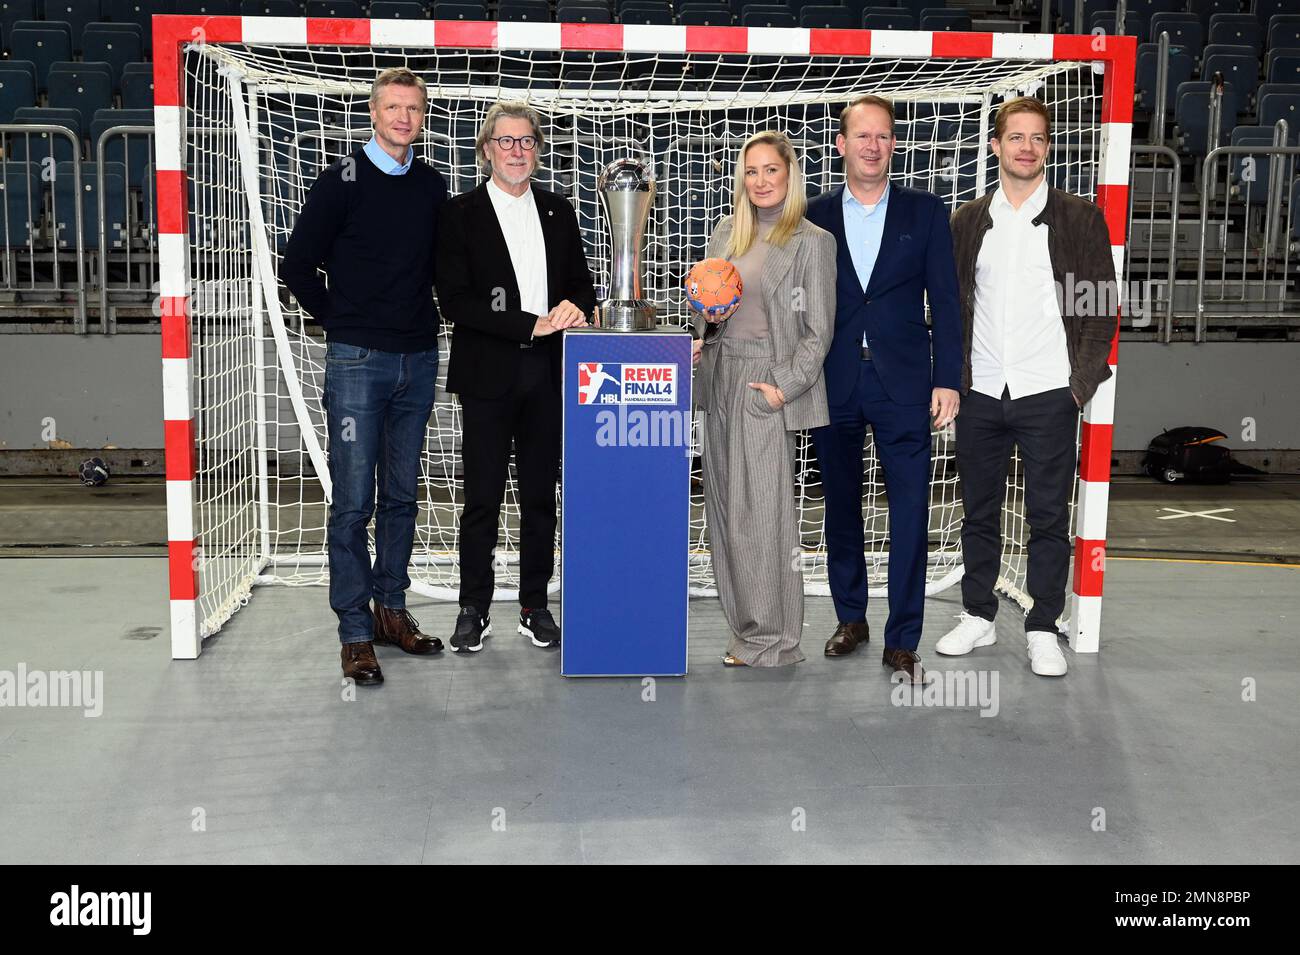 Cologne, Germany. 30th Jan, 2023. Sports ambassadors Torsten May, l-r, Toni Schumacher, Janine Kunze, LanxessArena boss Stefan Löcher and Moritz Müller stand in the handball goal at the press conference and presentation of the highlights in Cologne's sports year 2023. Credit: Horst Galuschka/dpa/Horst Galuschka dpa/Alamy Live News Stock Photo